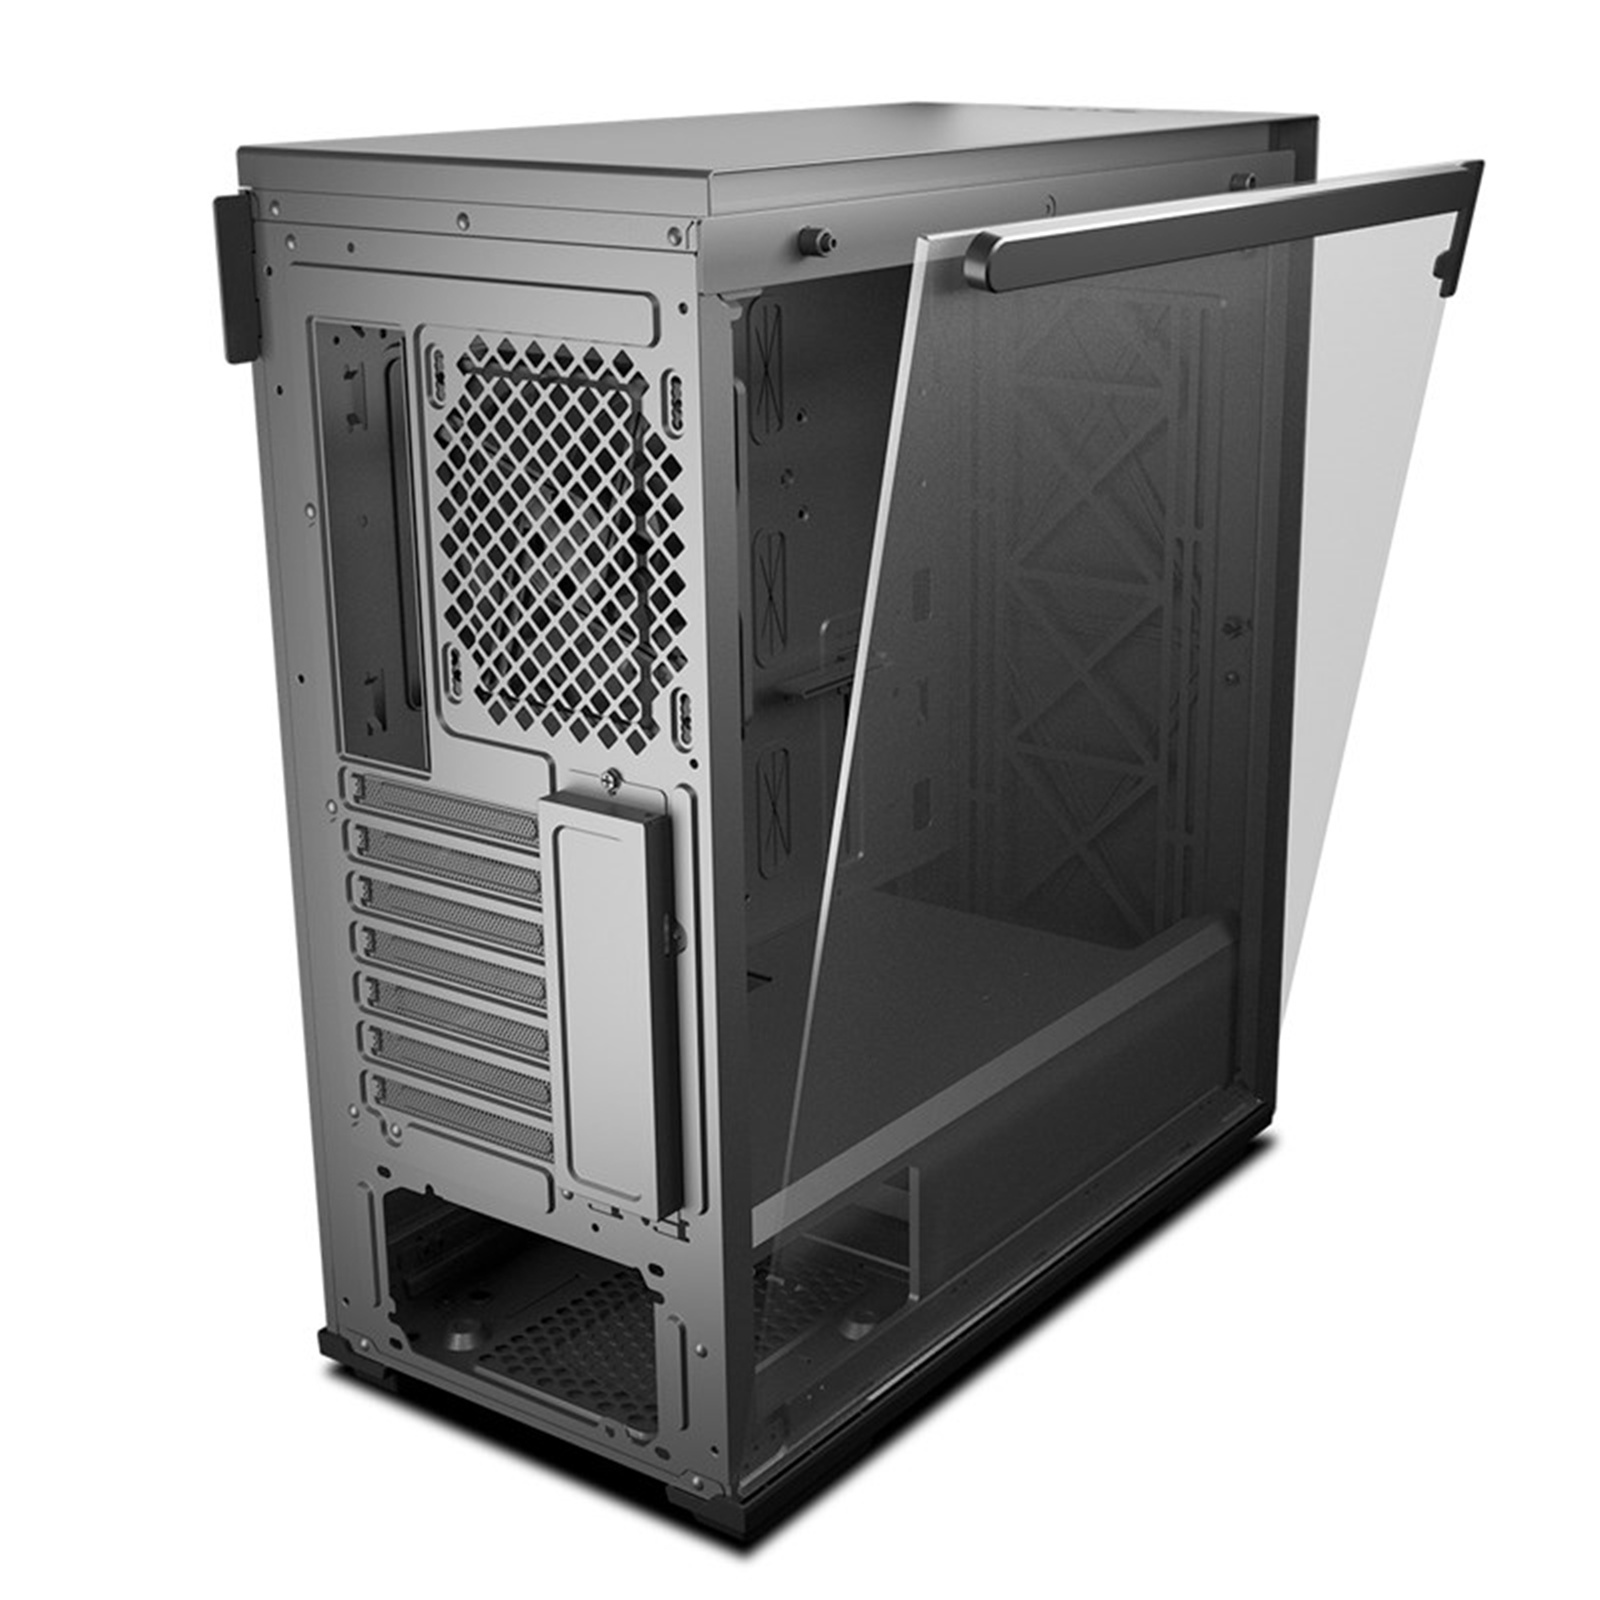 Buy the DEEPCOOL GamerStorm Macube 310 Black ATX Mid Tower Tempered Glass,  CPU... ( GS-ATX-MACUBE310-BKG0P ) online - PBTech.com